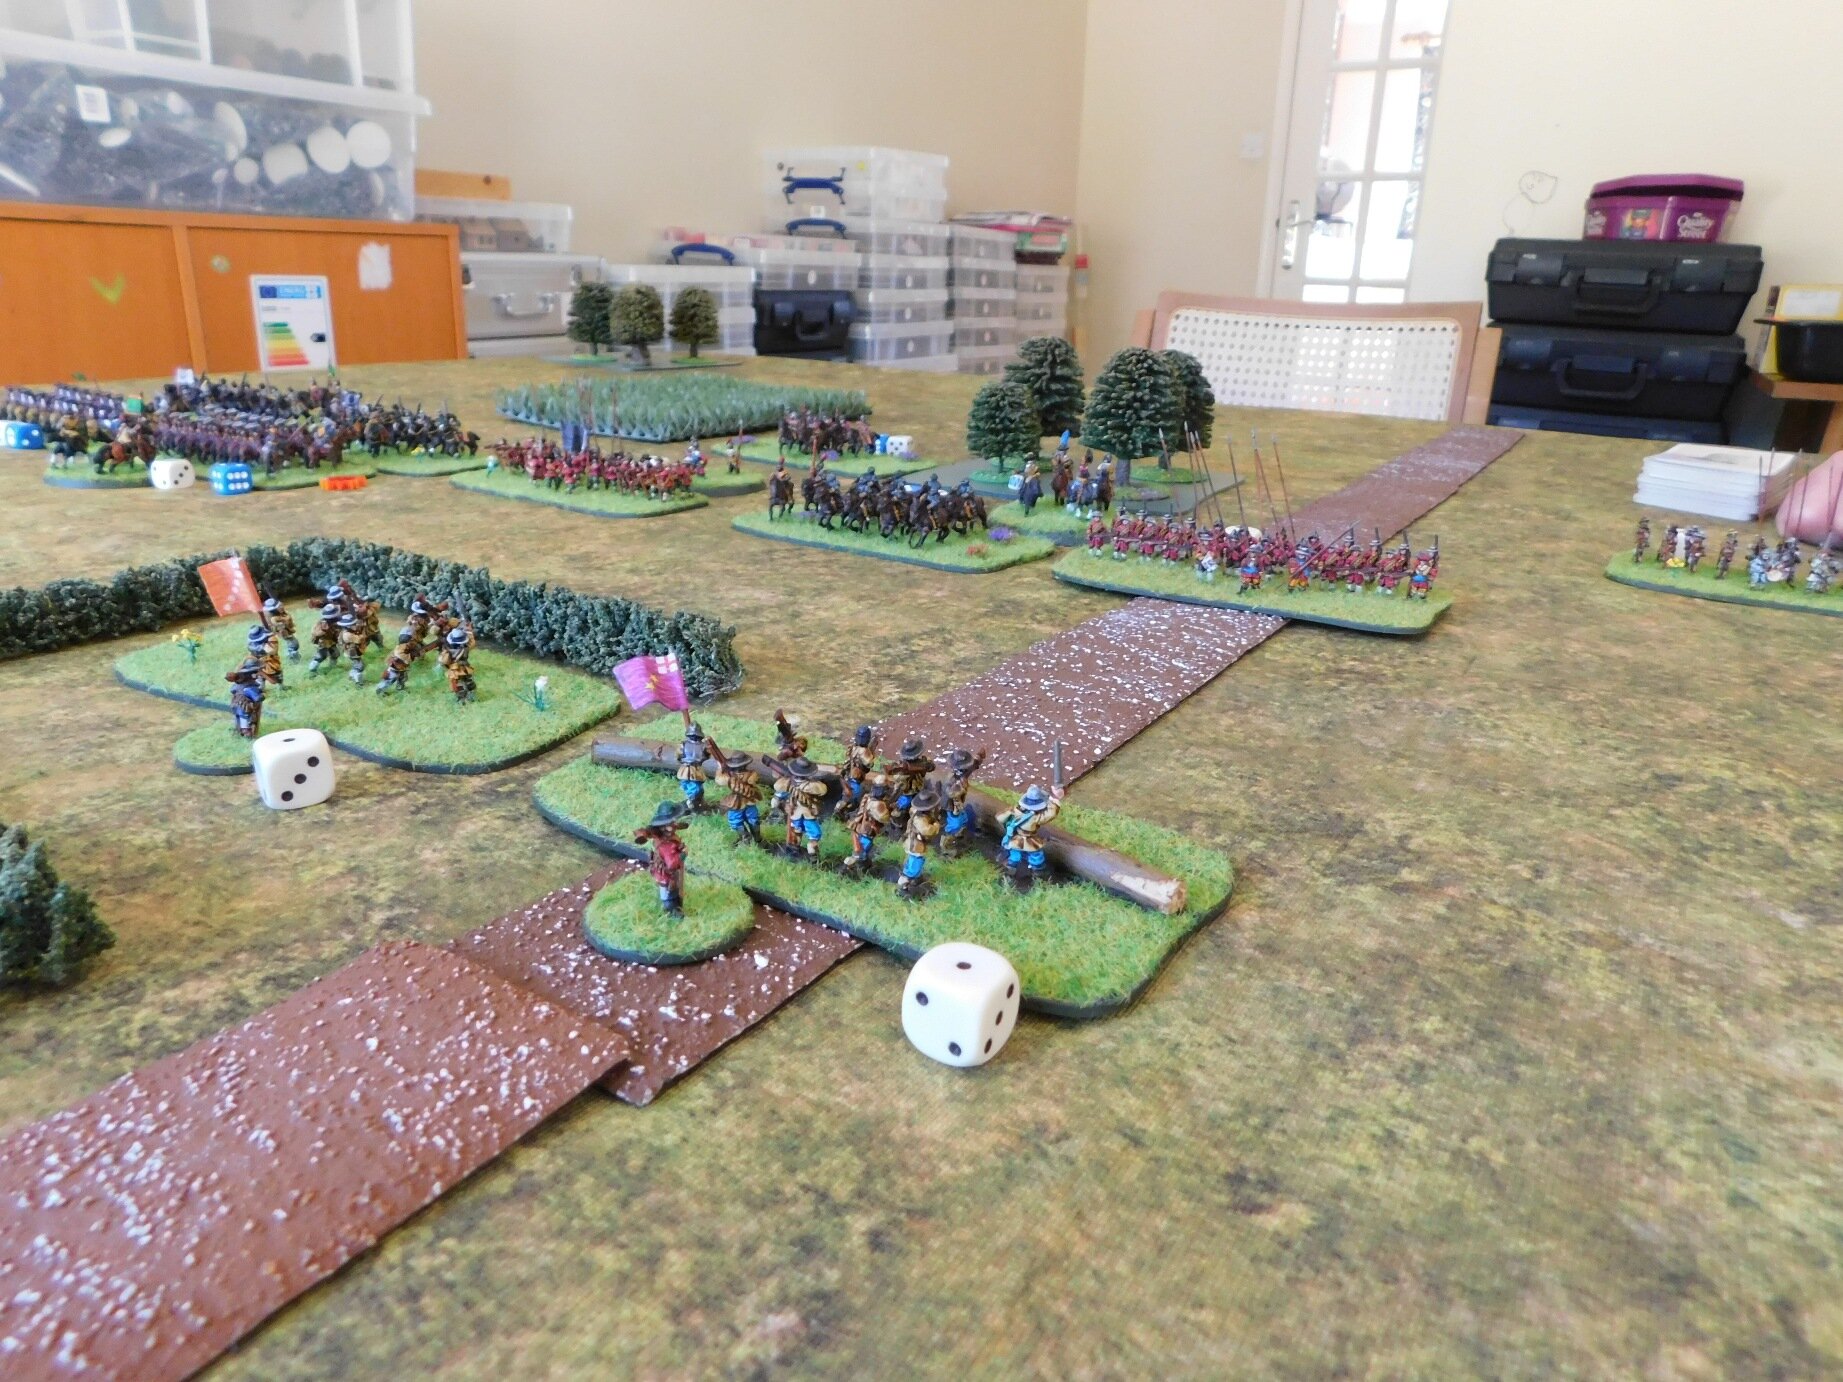 The Royalists Battalia on the road advance towards the Forlorn Hope